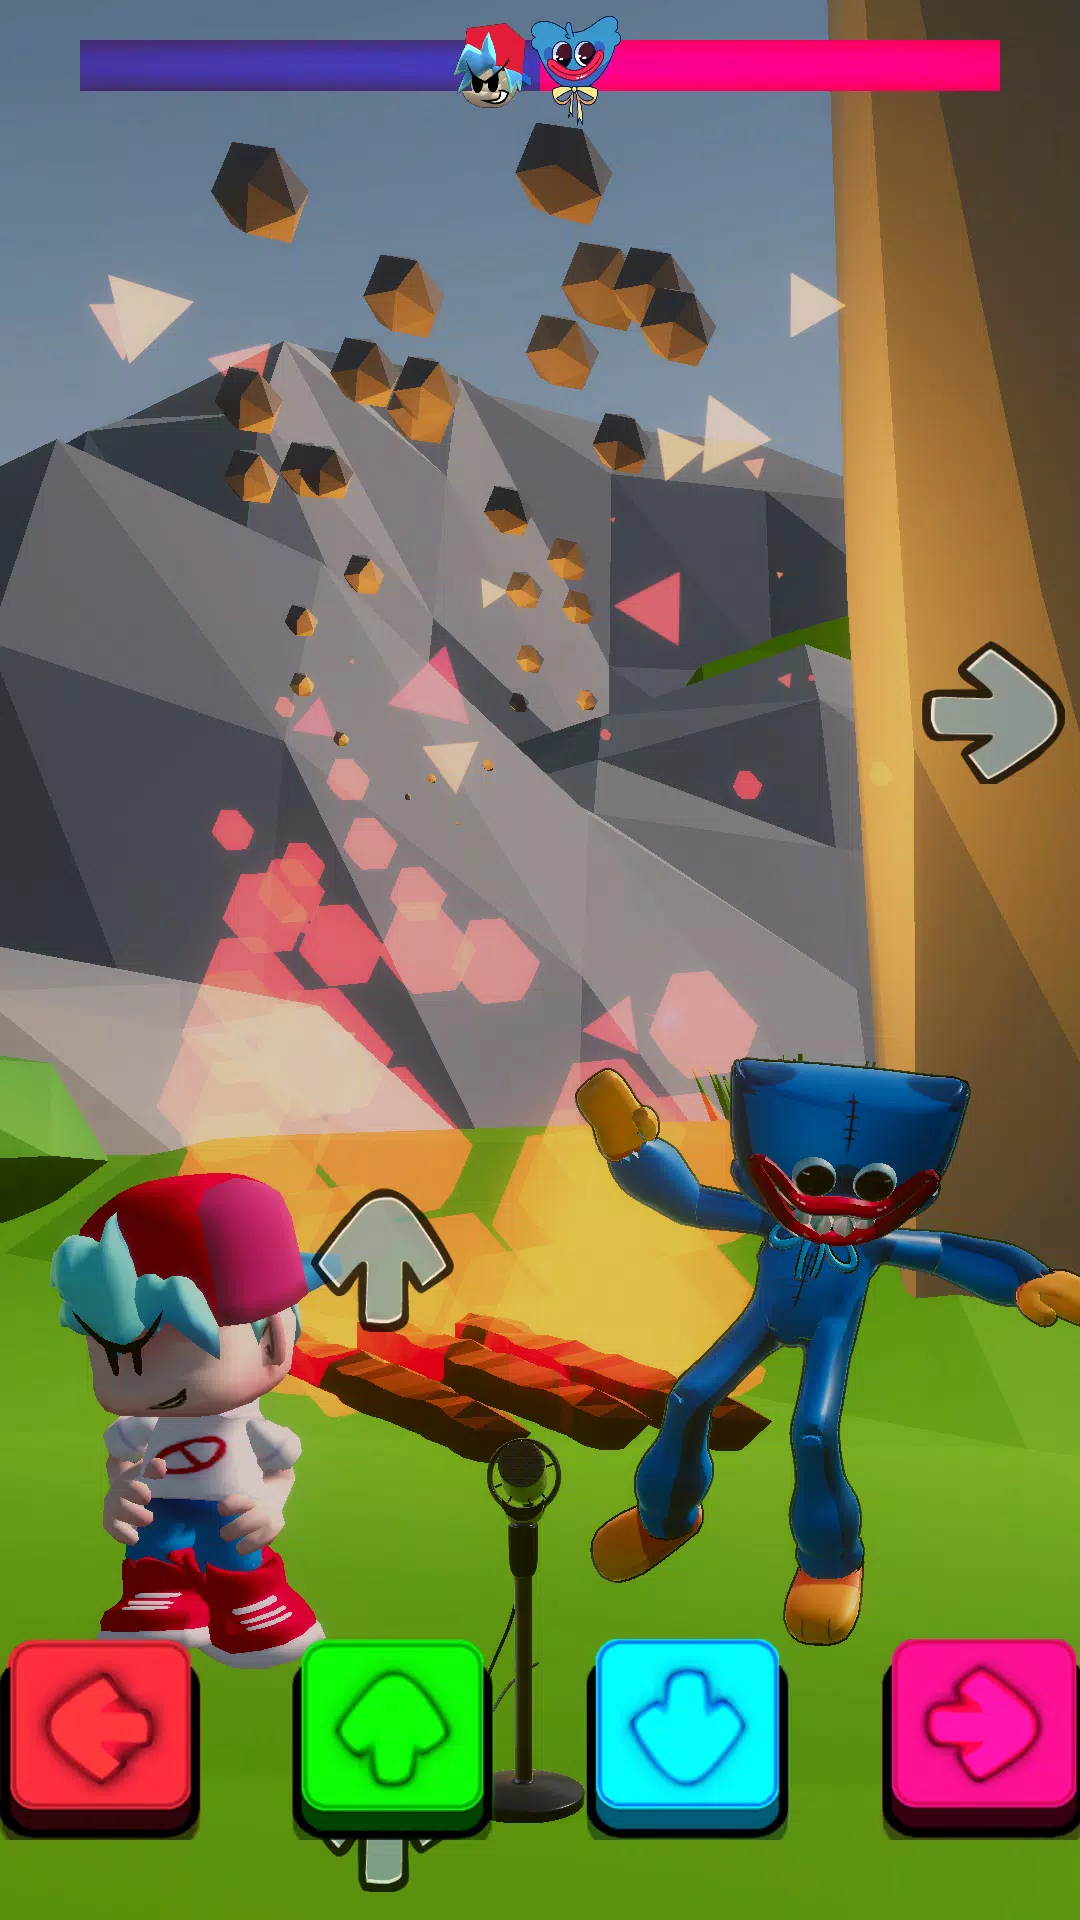 FNF Poppy playtime Chap 3 APK for Android Download